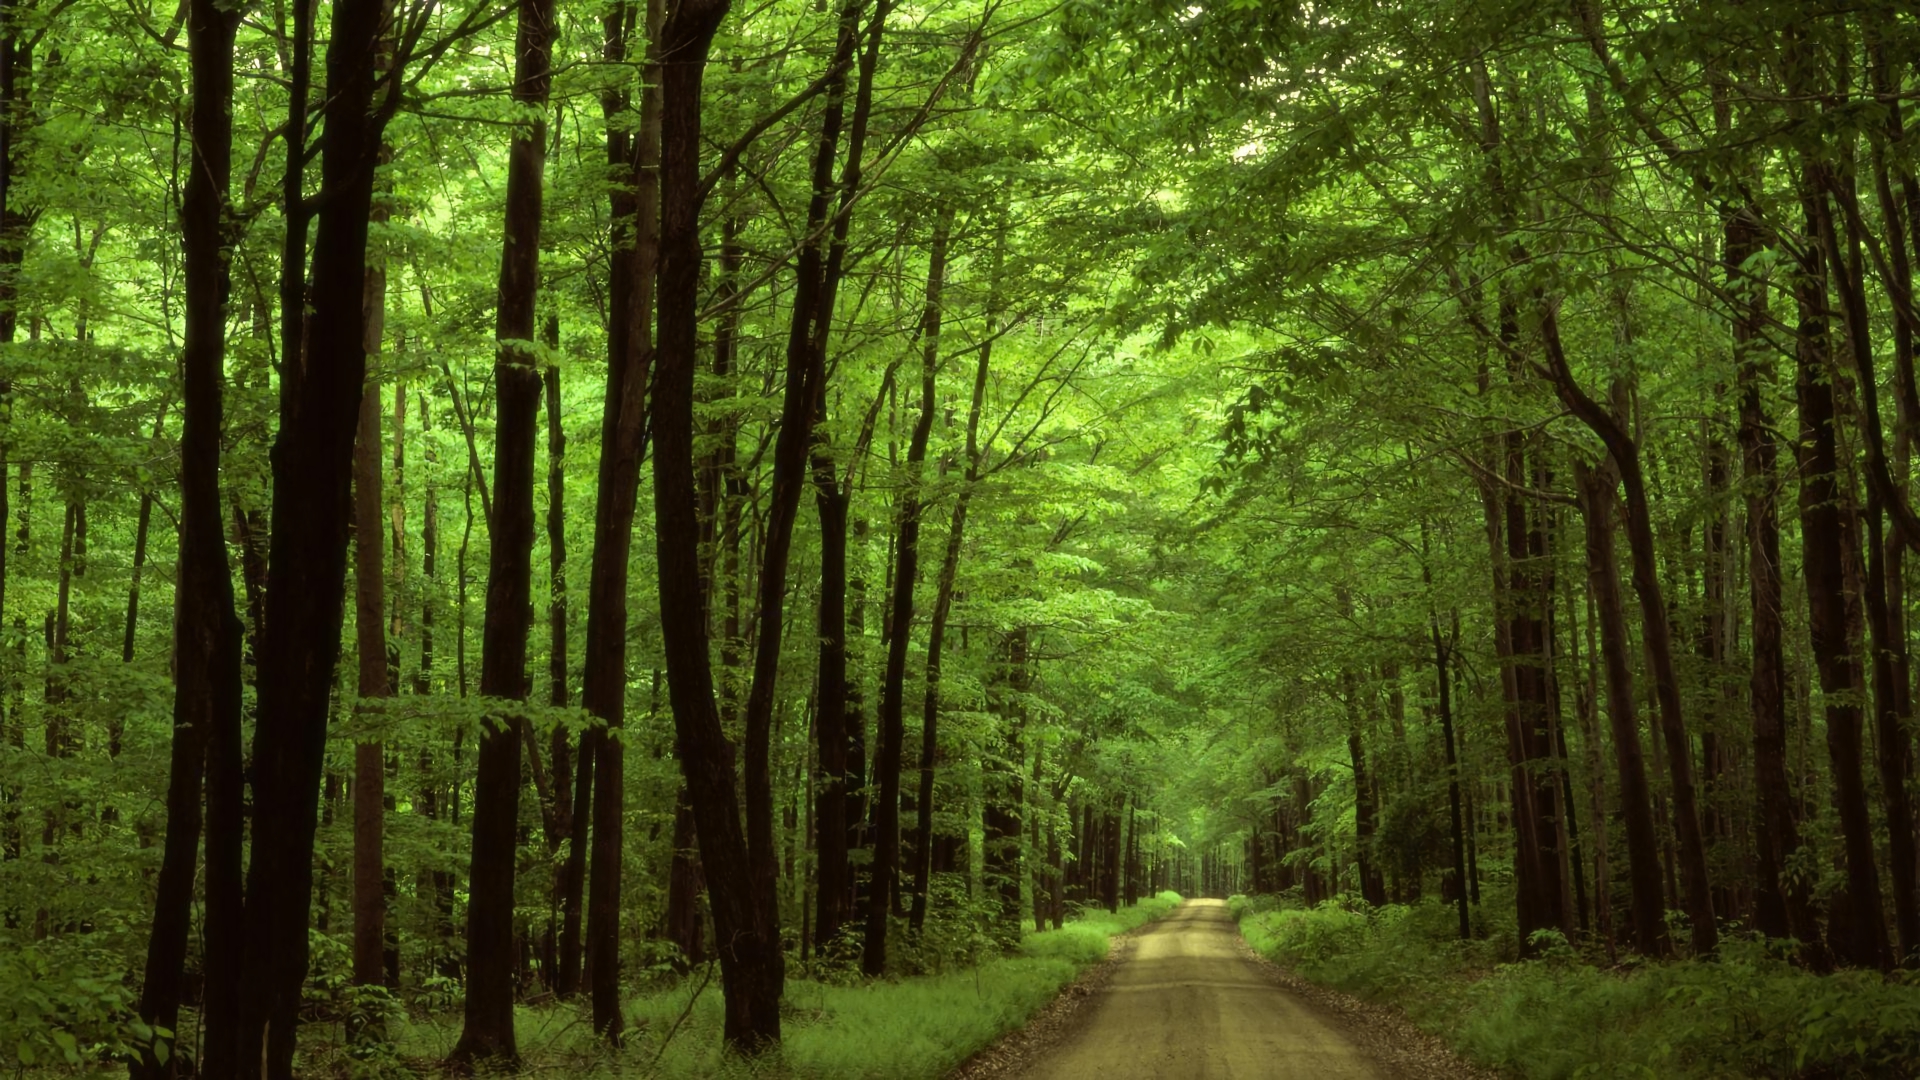 man made, road, dirt road, forest, greenery